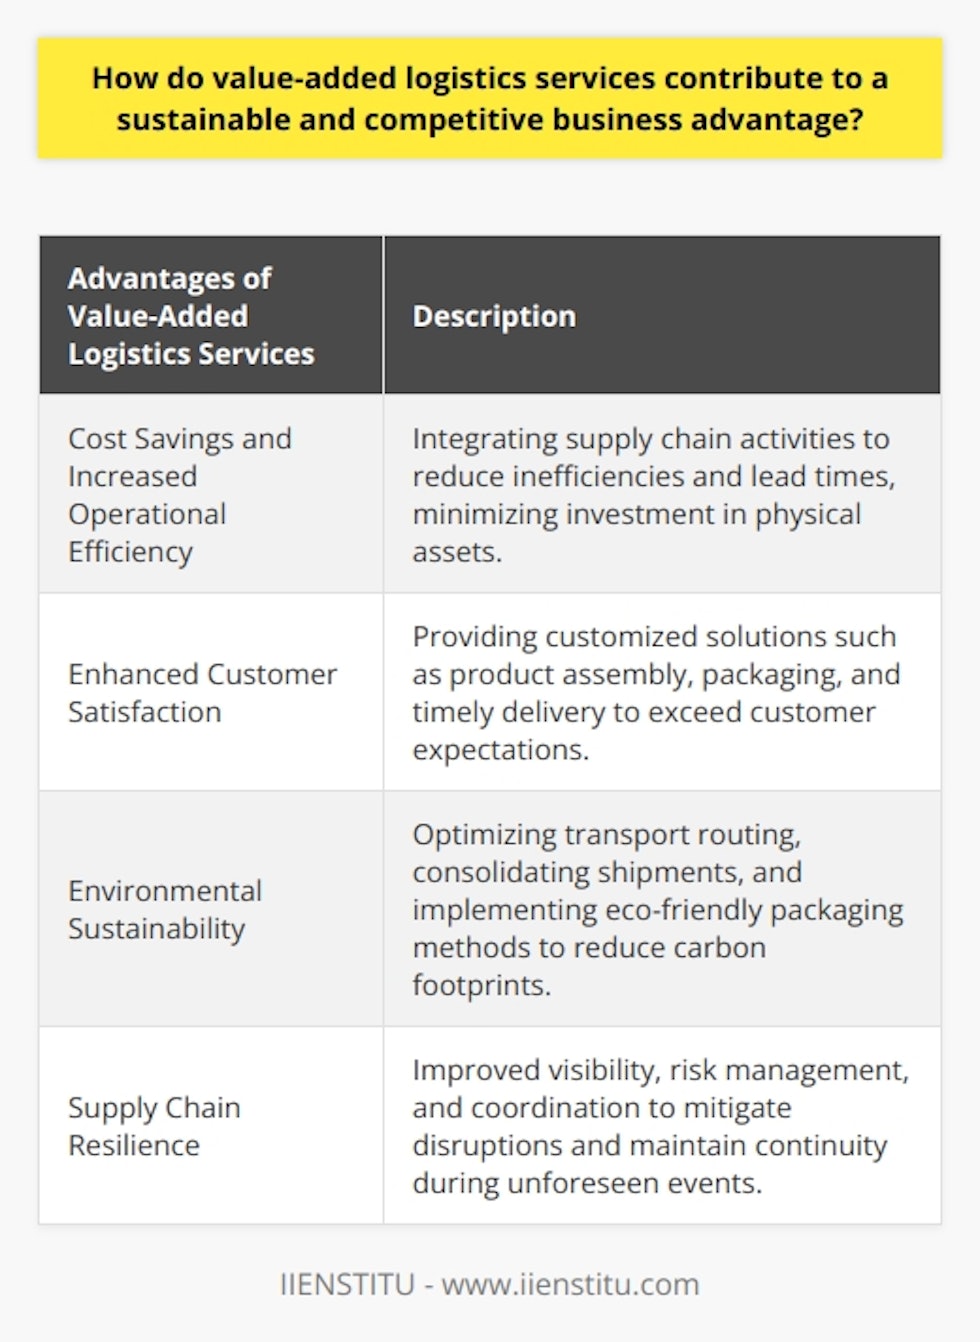 Value-added logistics services have become increasingly crucial in today's competitive business landscape. These services provide numerous benefits, including cost savings, improved customer satisfaction, environmental sustainability, and enhanced supply chain resilience.One of the primary advantages of value-added logistics services is cost savings and increased operational efficiency. By integrating various supply chain activities such as transportation, warehousing, and inventory control, businesses can streamline their operations, reducing inefficiencies and lead times. This integration also enables companies to minimize capital investment in physical assets, allowing them to allocate resources towards core activities and strengthen their overall business offerings.Another significant benefit is the ability to enhance customer satisfaction. Through value-added logistics services, businesses can provide customized solutions such as product assembly, packaging, and timely delivery. This level of customization helps exceed customer expectations, leading to repeat business, positive word-of-mouth, and a stronger brand reputation.Furthermore, value-added logistics services contribute to environmental sustainability. By optimizing transport routing, consolidating shipments, and implementing environmentally-friendly packaging methods, businesses can reduce their carbon footprints. This not only helps companies achieve their sustainability targets but also improves their market image in an increasingly eco-conscious world.Moreover, these services foster supply chain resilience. Logistics providers that offer value-added services provide better visibility, risk management, and enhanced coordination, allowing businesses to mitigate potential disruptions and maintain continuity during unforeseen events. This resilience is essential for business growth and staying ahead of competitors.In conclusion, value-added logistics services play a significant role in contributing to a sustainable and competitive business advantage. By enabling cost savings, enhancing customer satisfaction, promoting environmental sustainability, and fortifying supply chain resilience, integrating these services into a company's supply chain policy can prove invaluable in maintaining a competitive edge in today's complex markets.